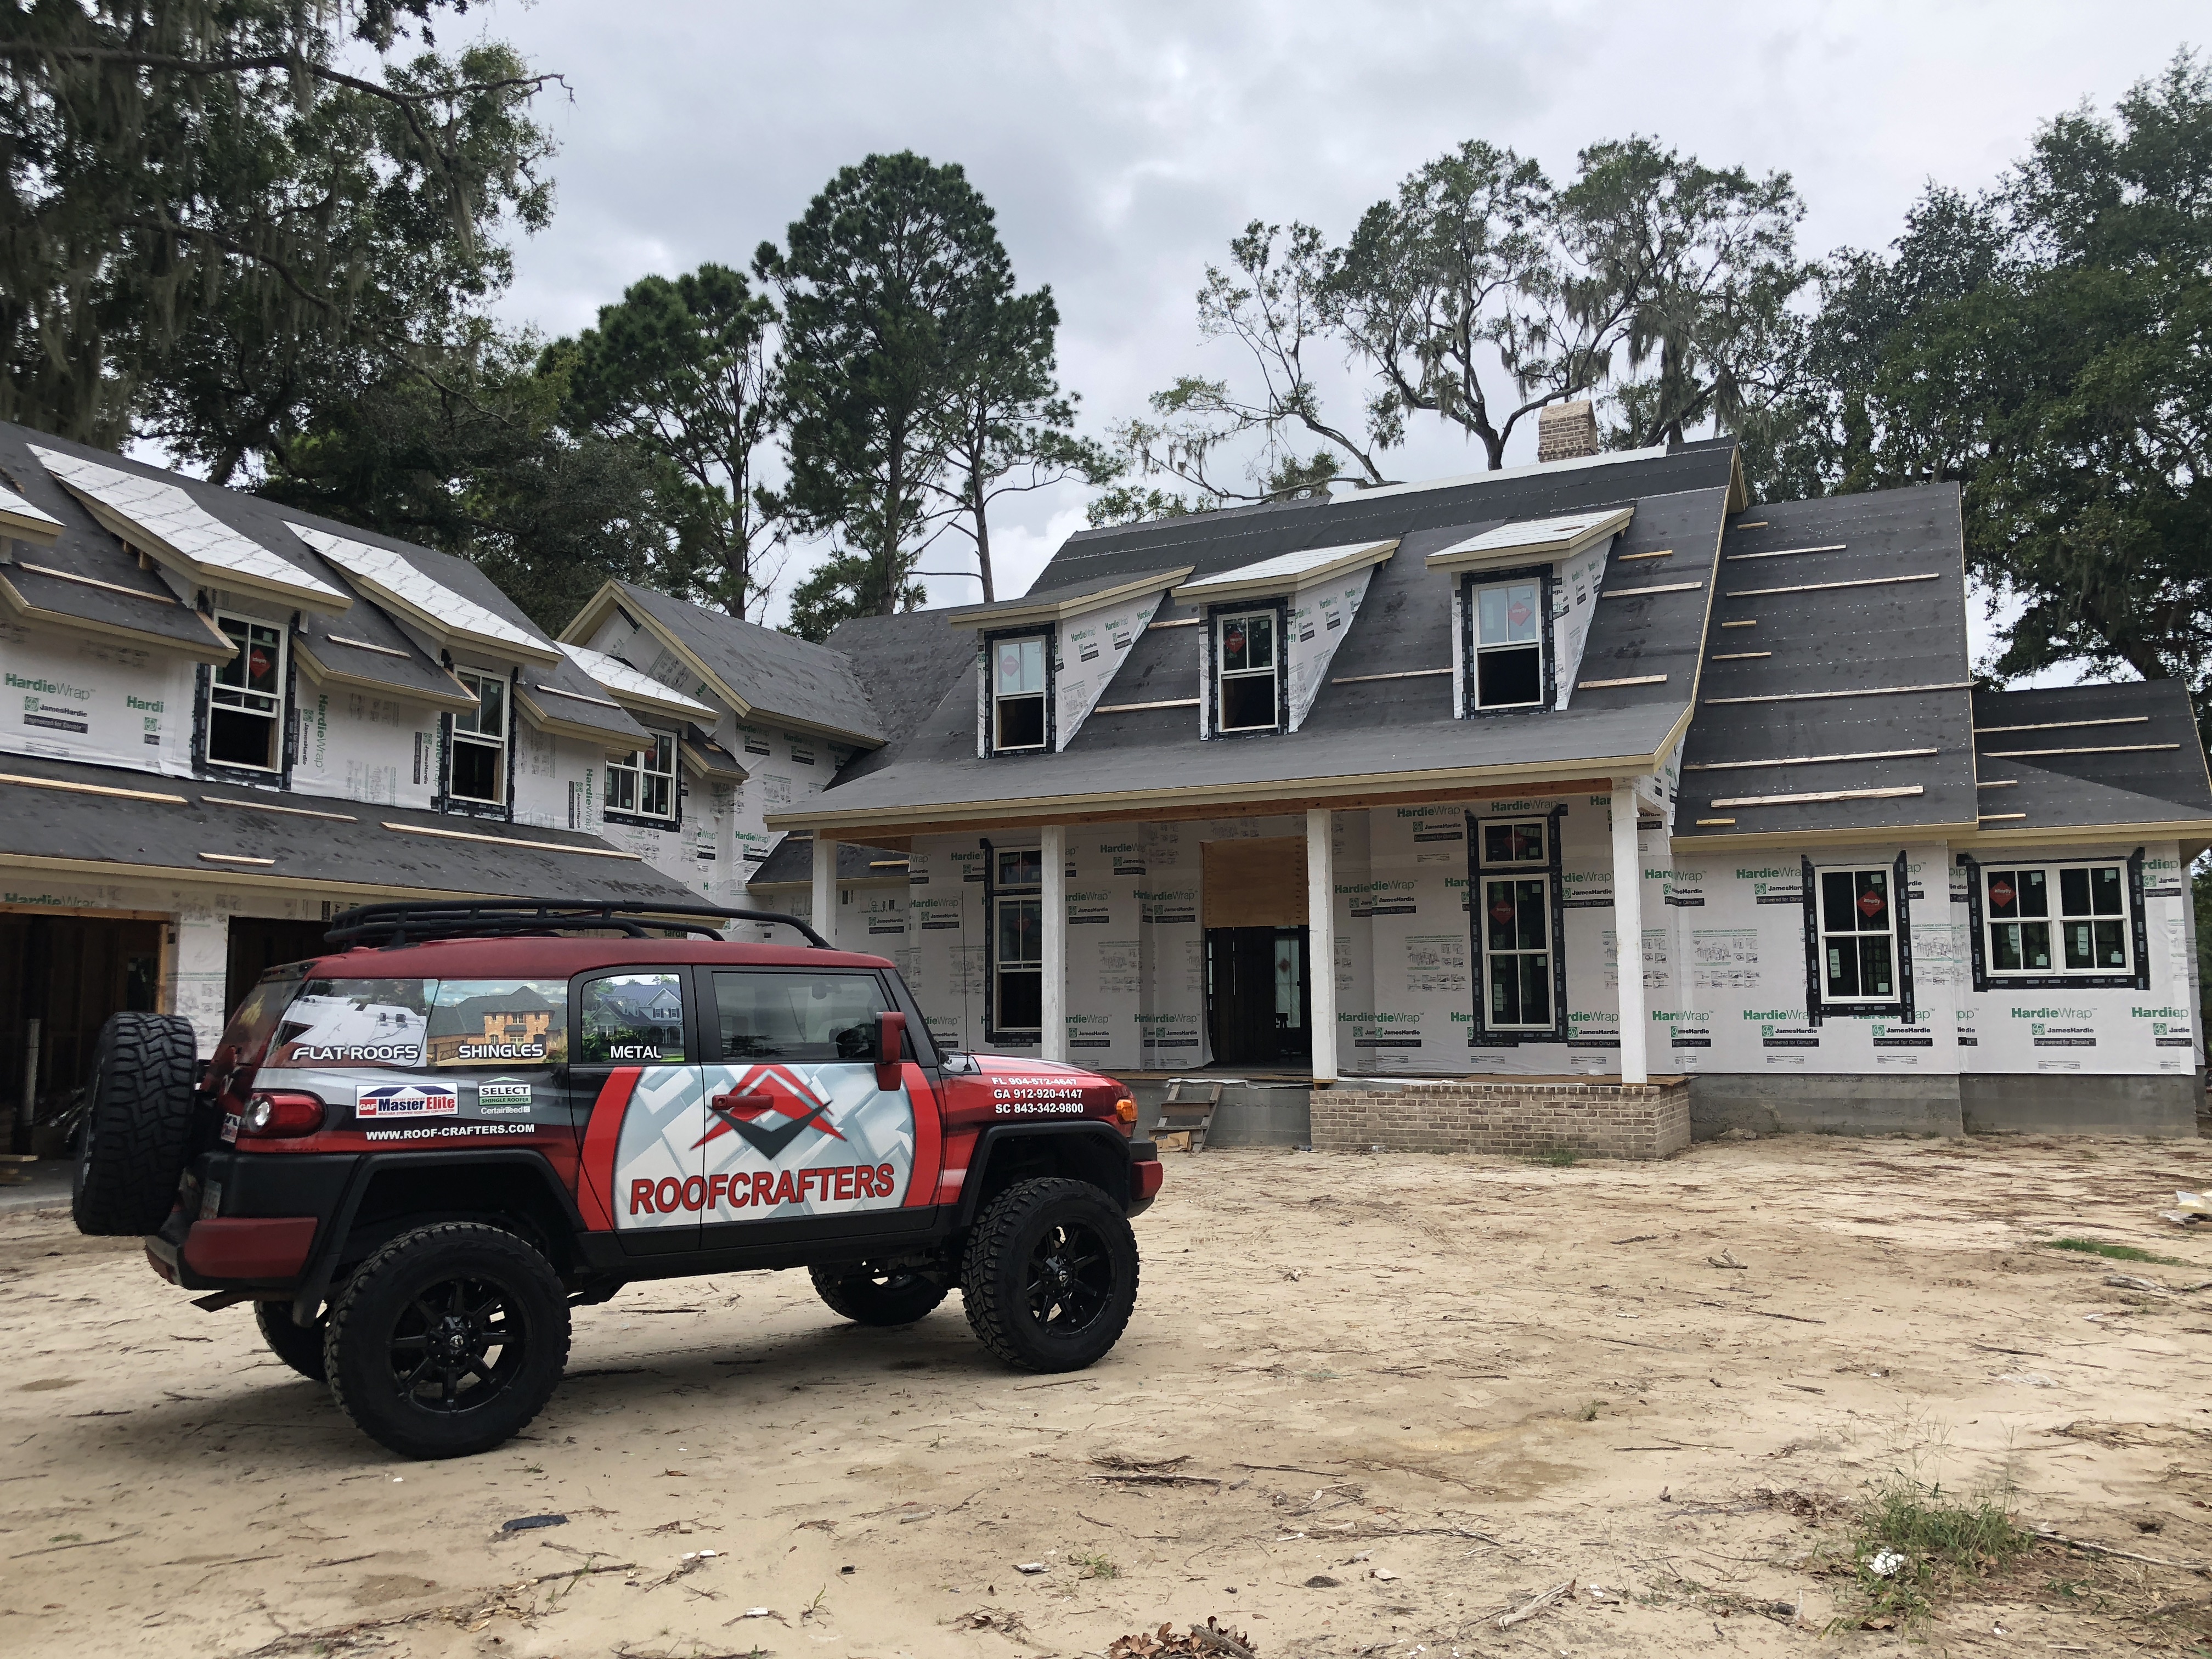 RoofCrafters truck in front of a new construction home